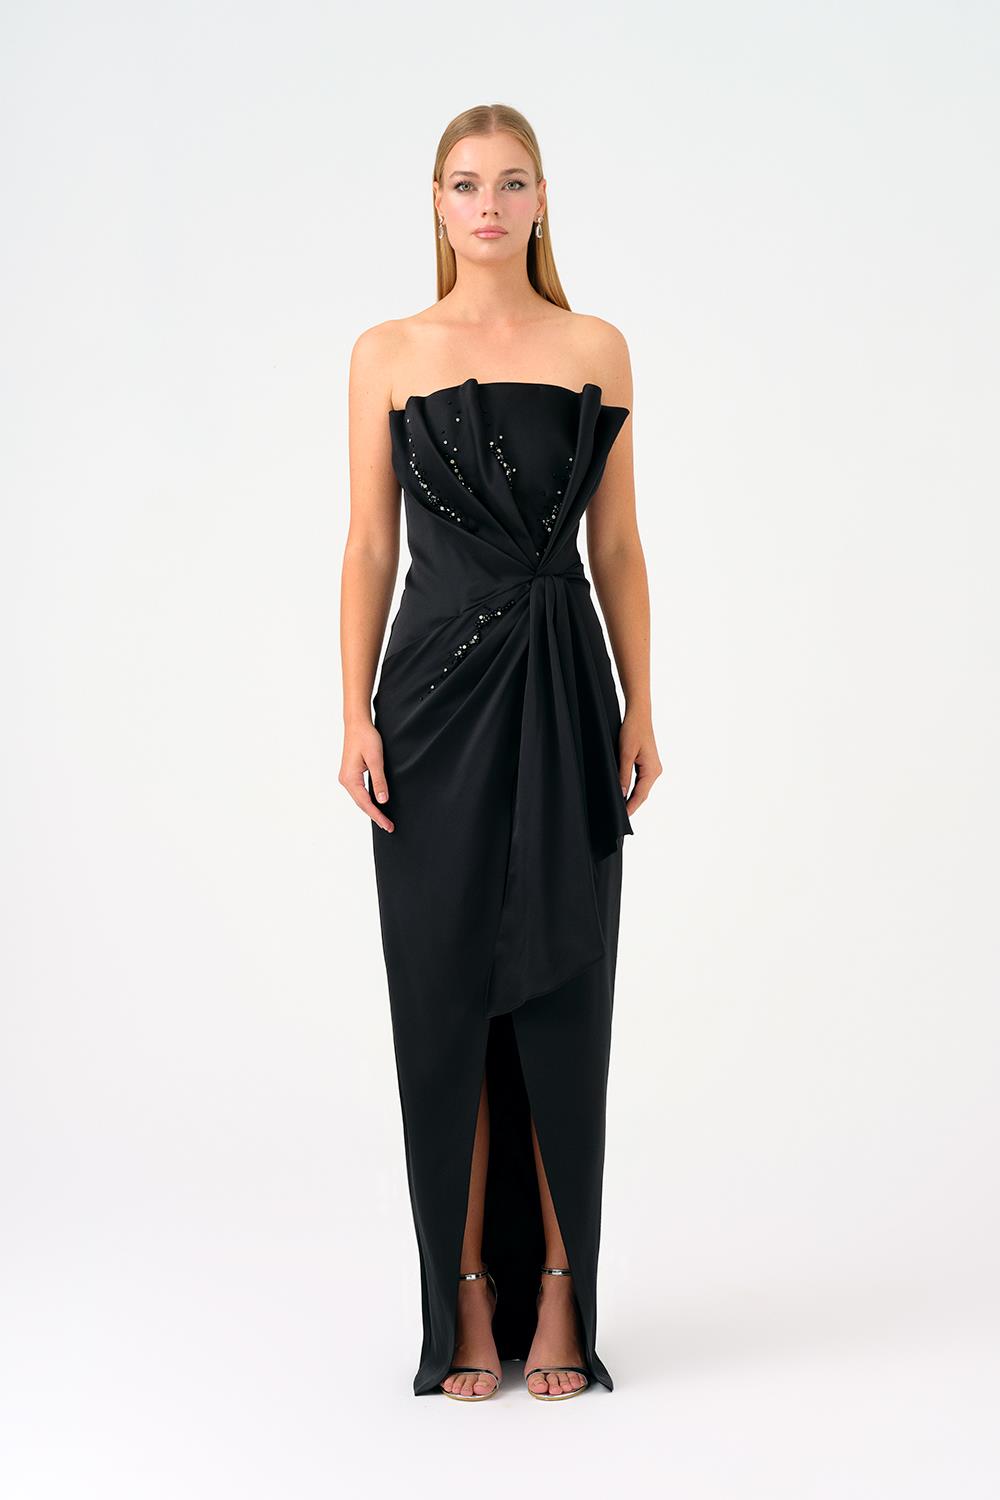 Draped Long Evening Dress with Slits and Stone Embroidery Details